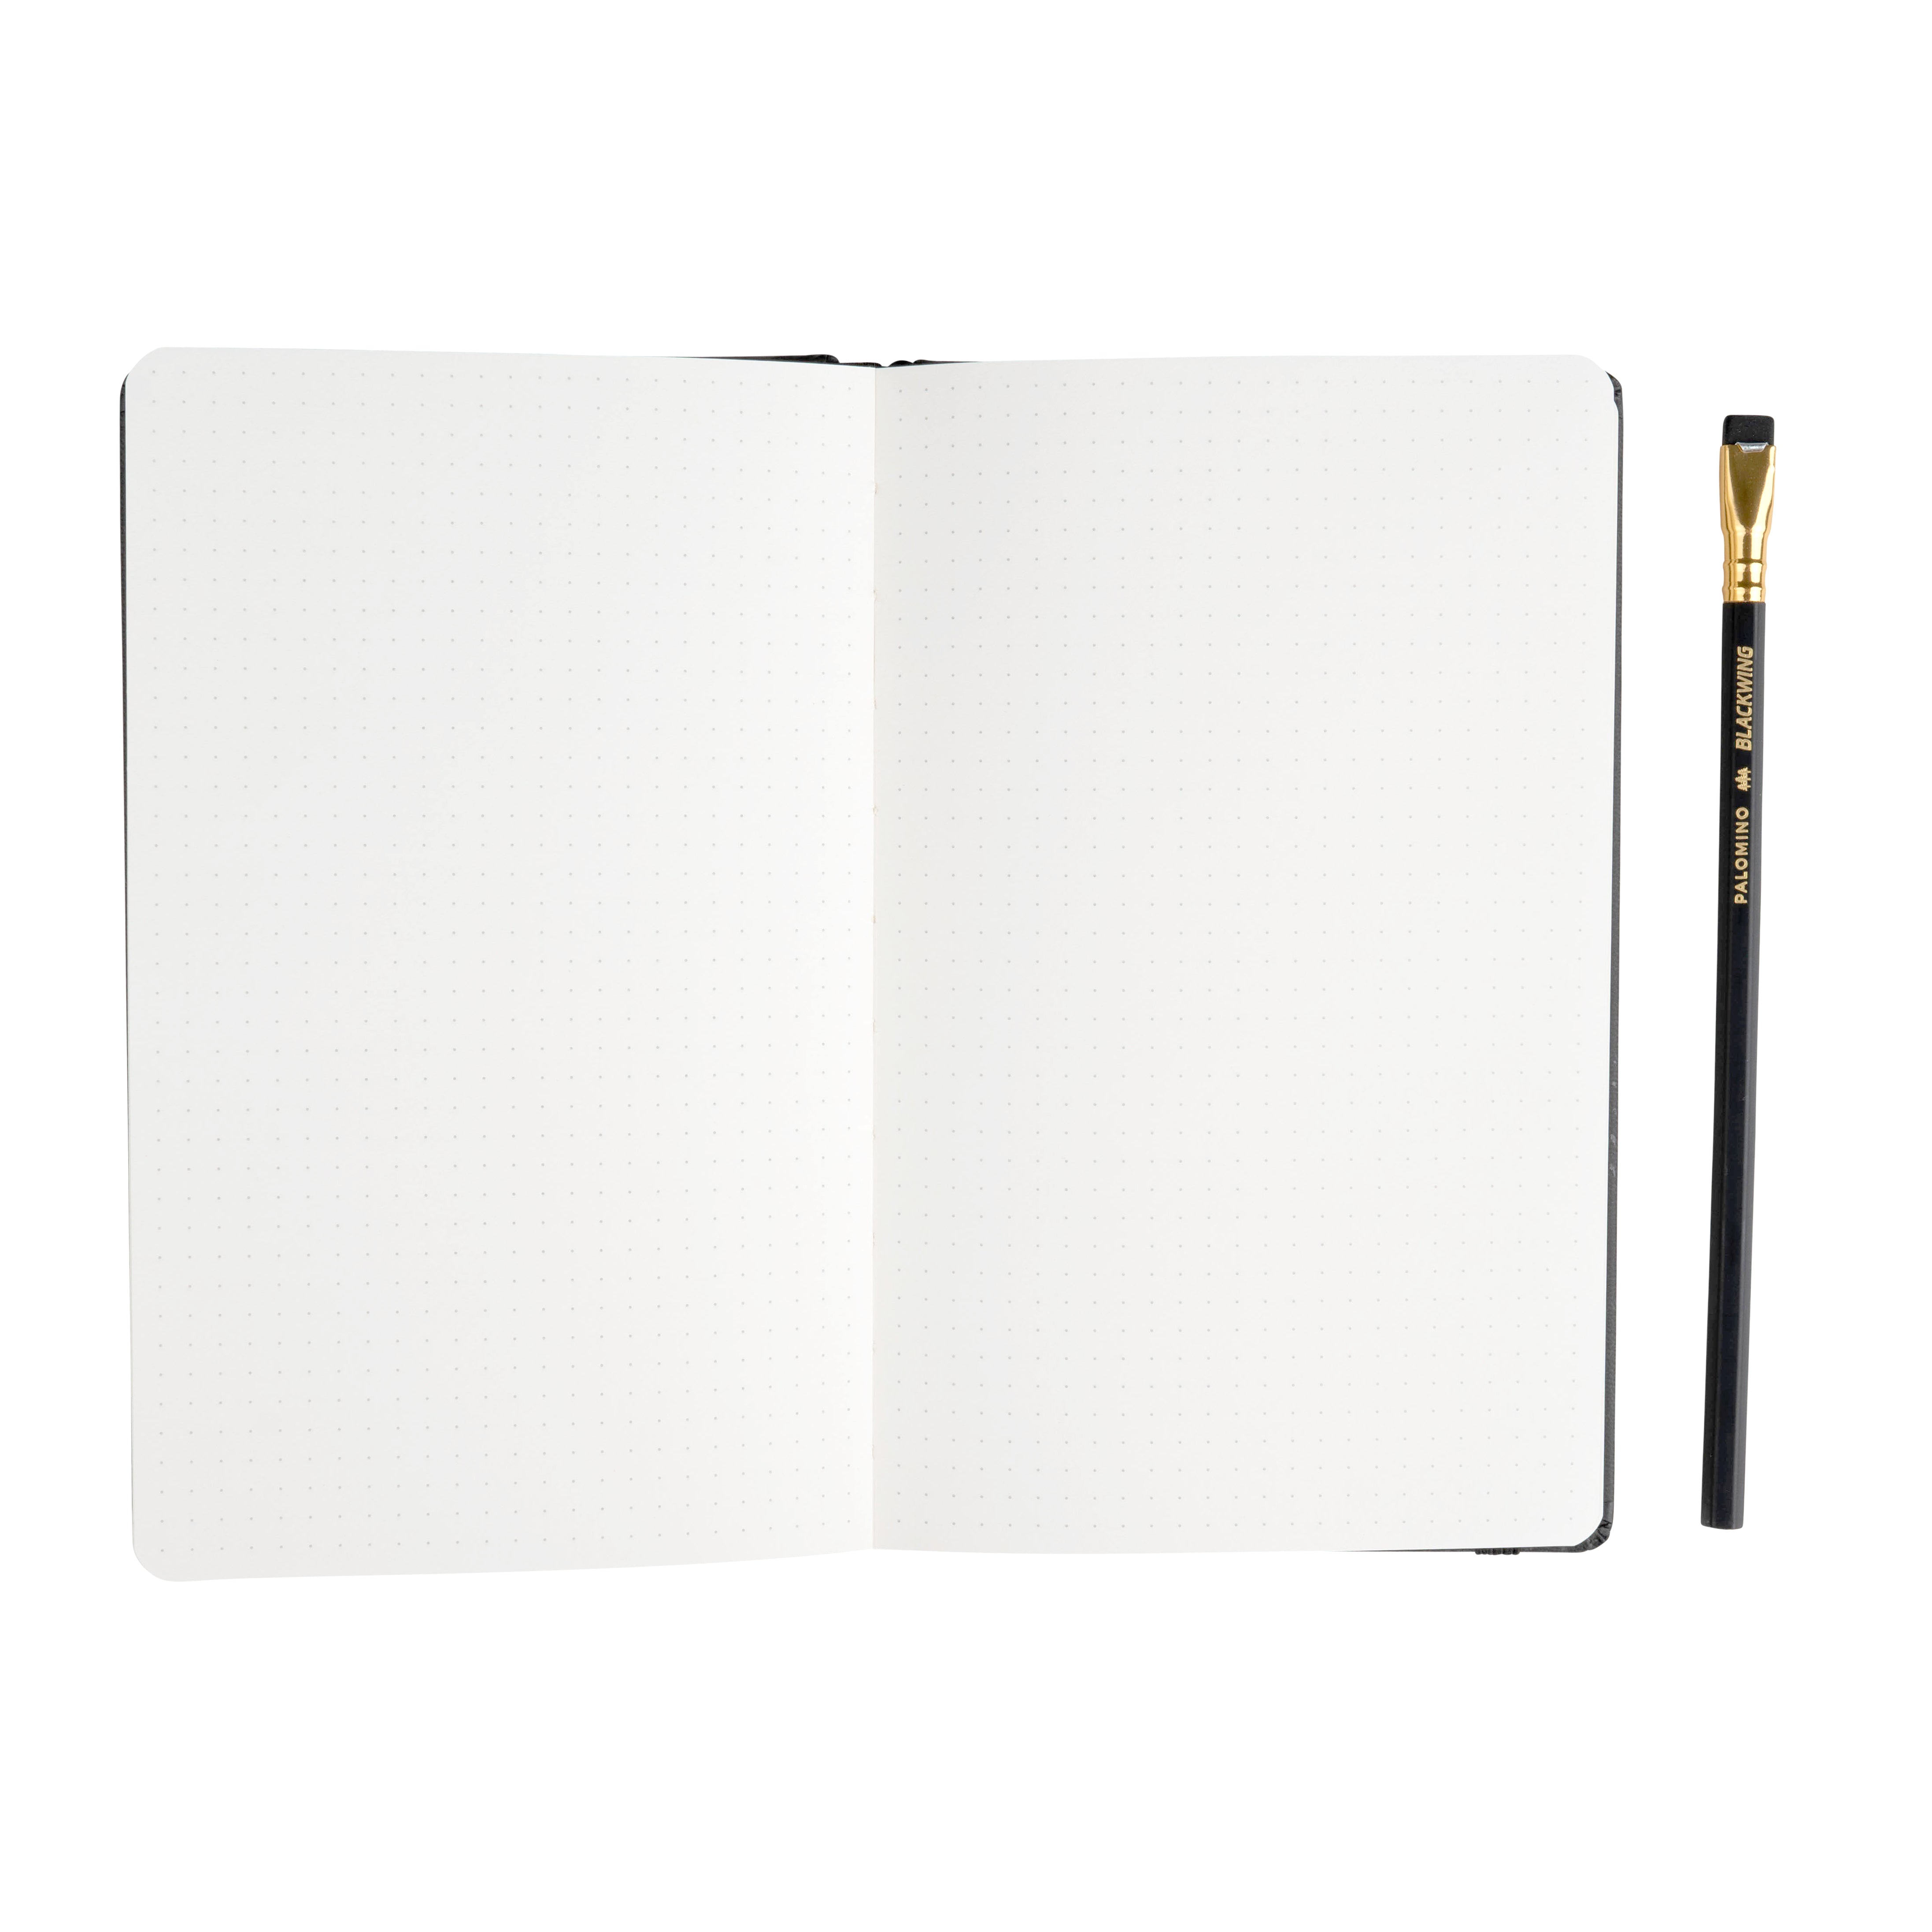 Blackwing Slate Notebook - Pencil Included